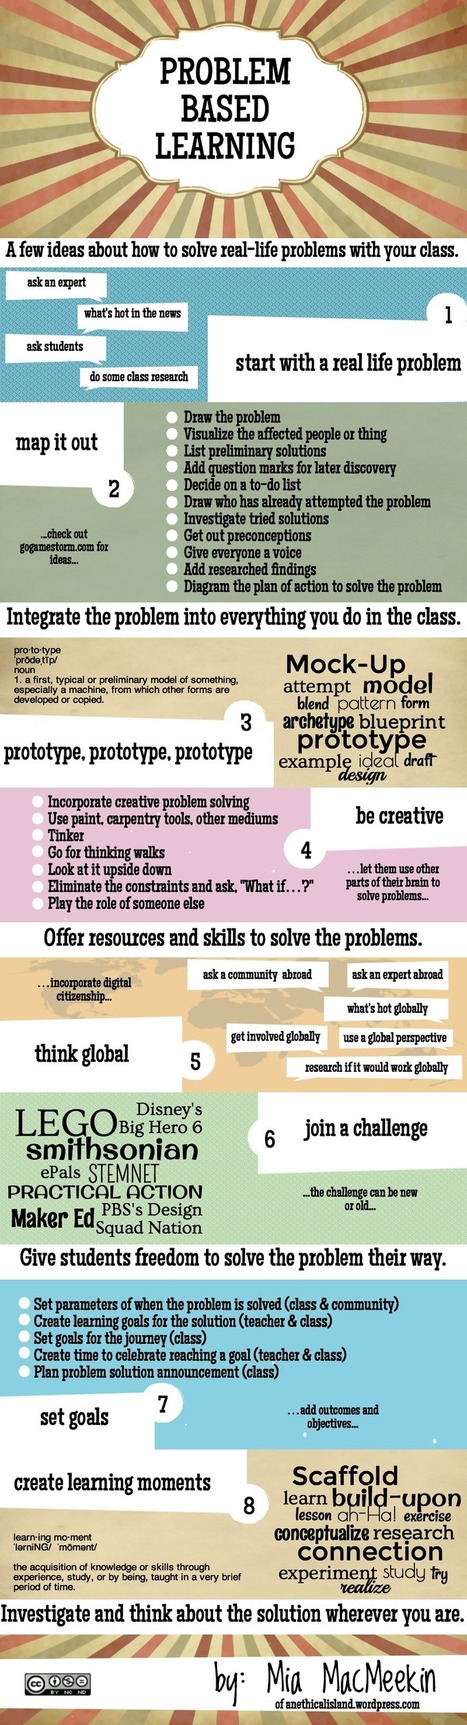 PBL- Let the Class Solve World Problems | Education 2.0 & 3.0 | Scoop.it